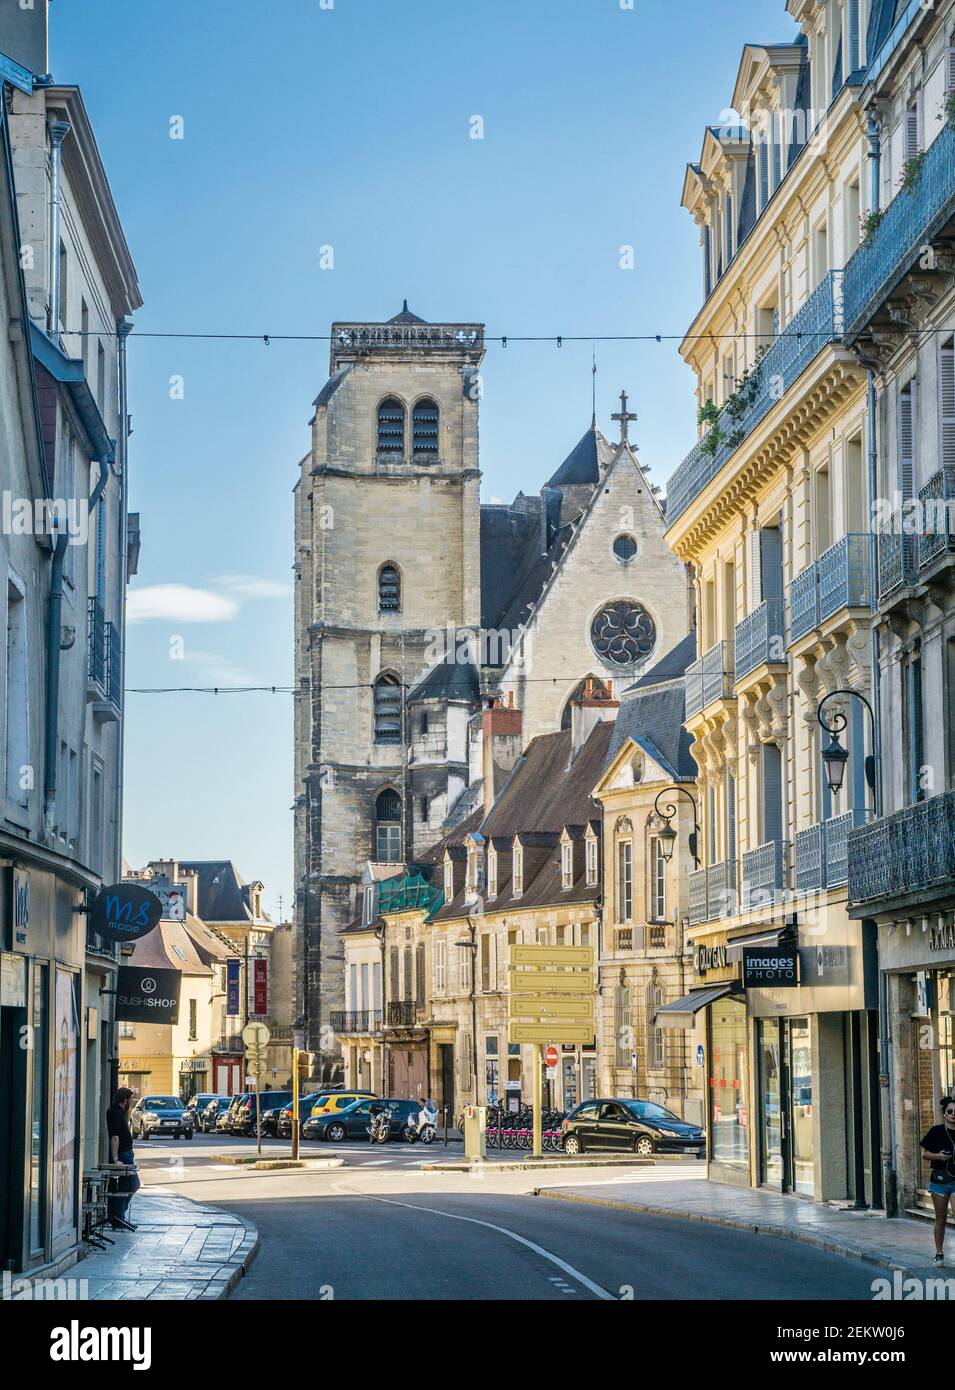 Place Bossuet, Dijon, with view of Gothic style Saint-Jean Church which today houses the Dijon-Bourgogne Theater, Dijon, Burgundy, Côte-d'Or departmen Stock Photo